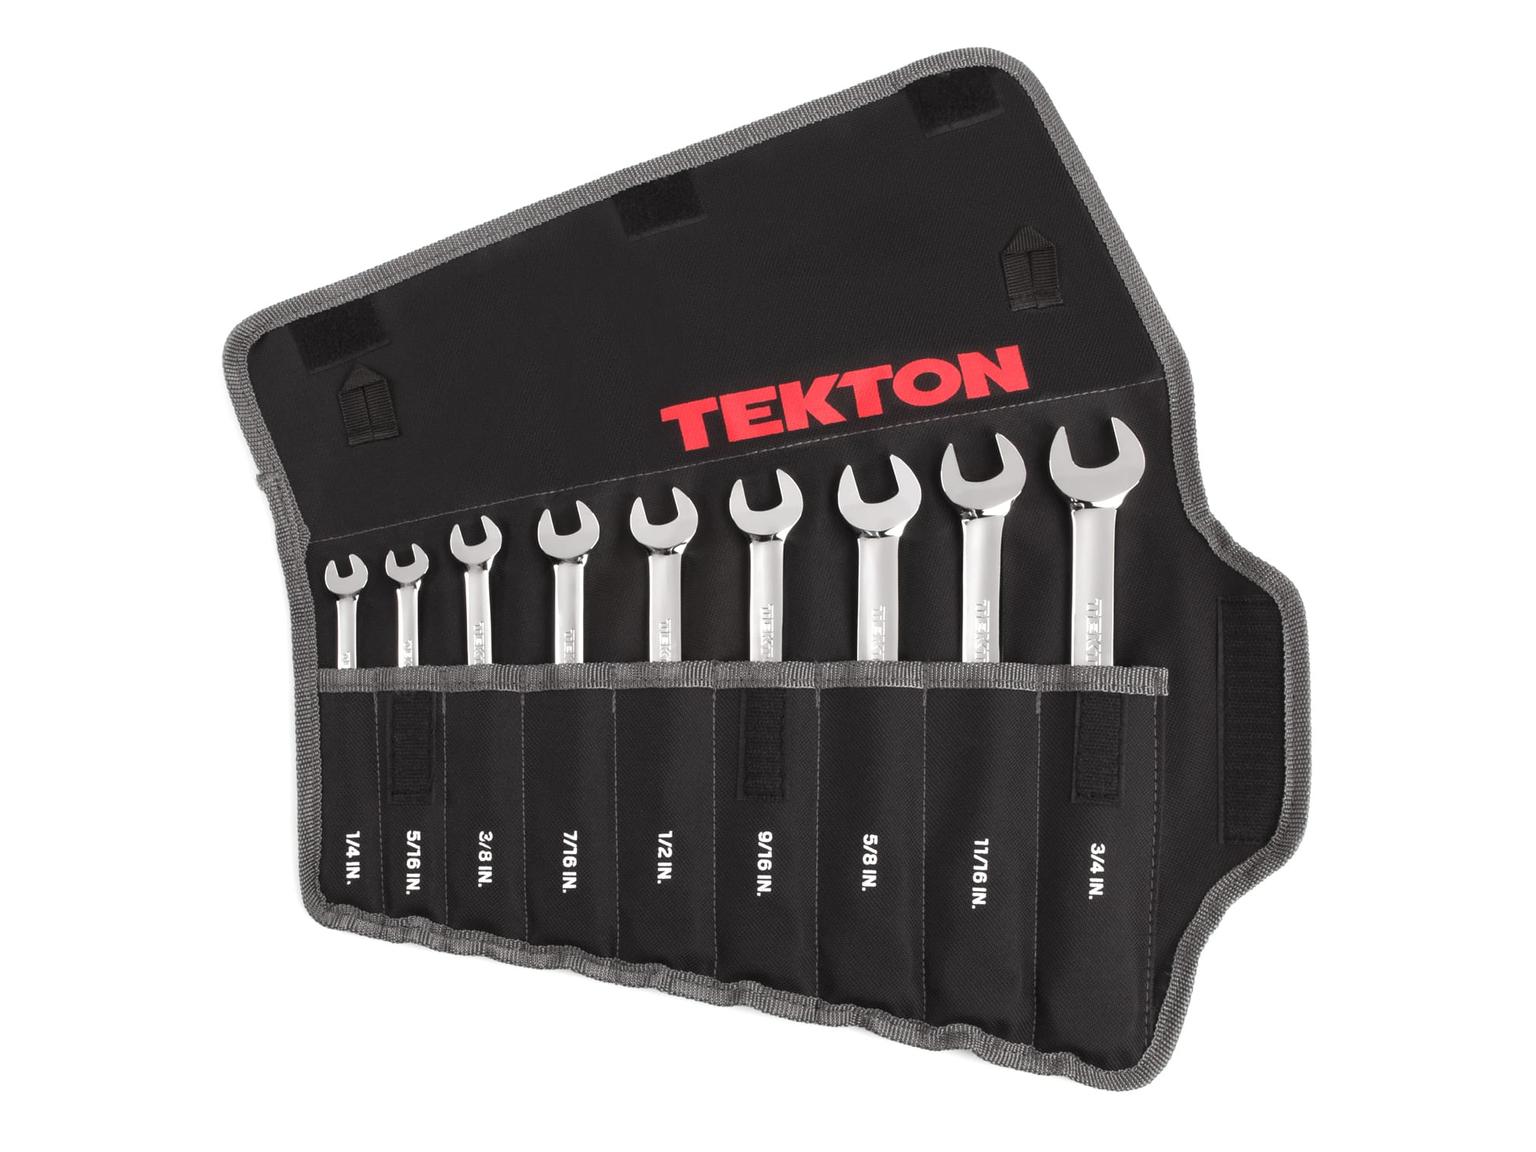 TEKTON WRN53087-T Ratcheting Combination Wrench Set with Pouch, 9-Piece (1/4-3/4 in.)